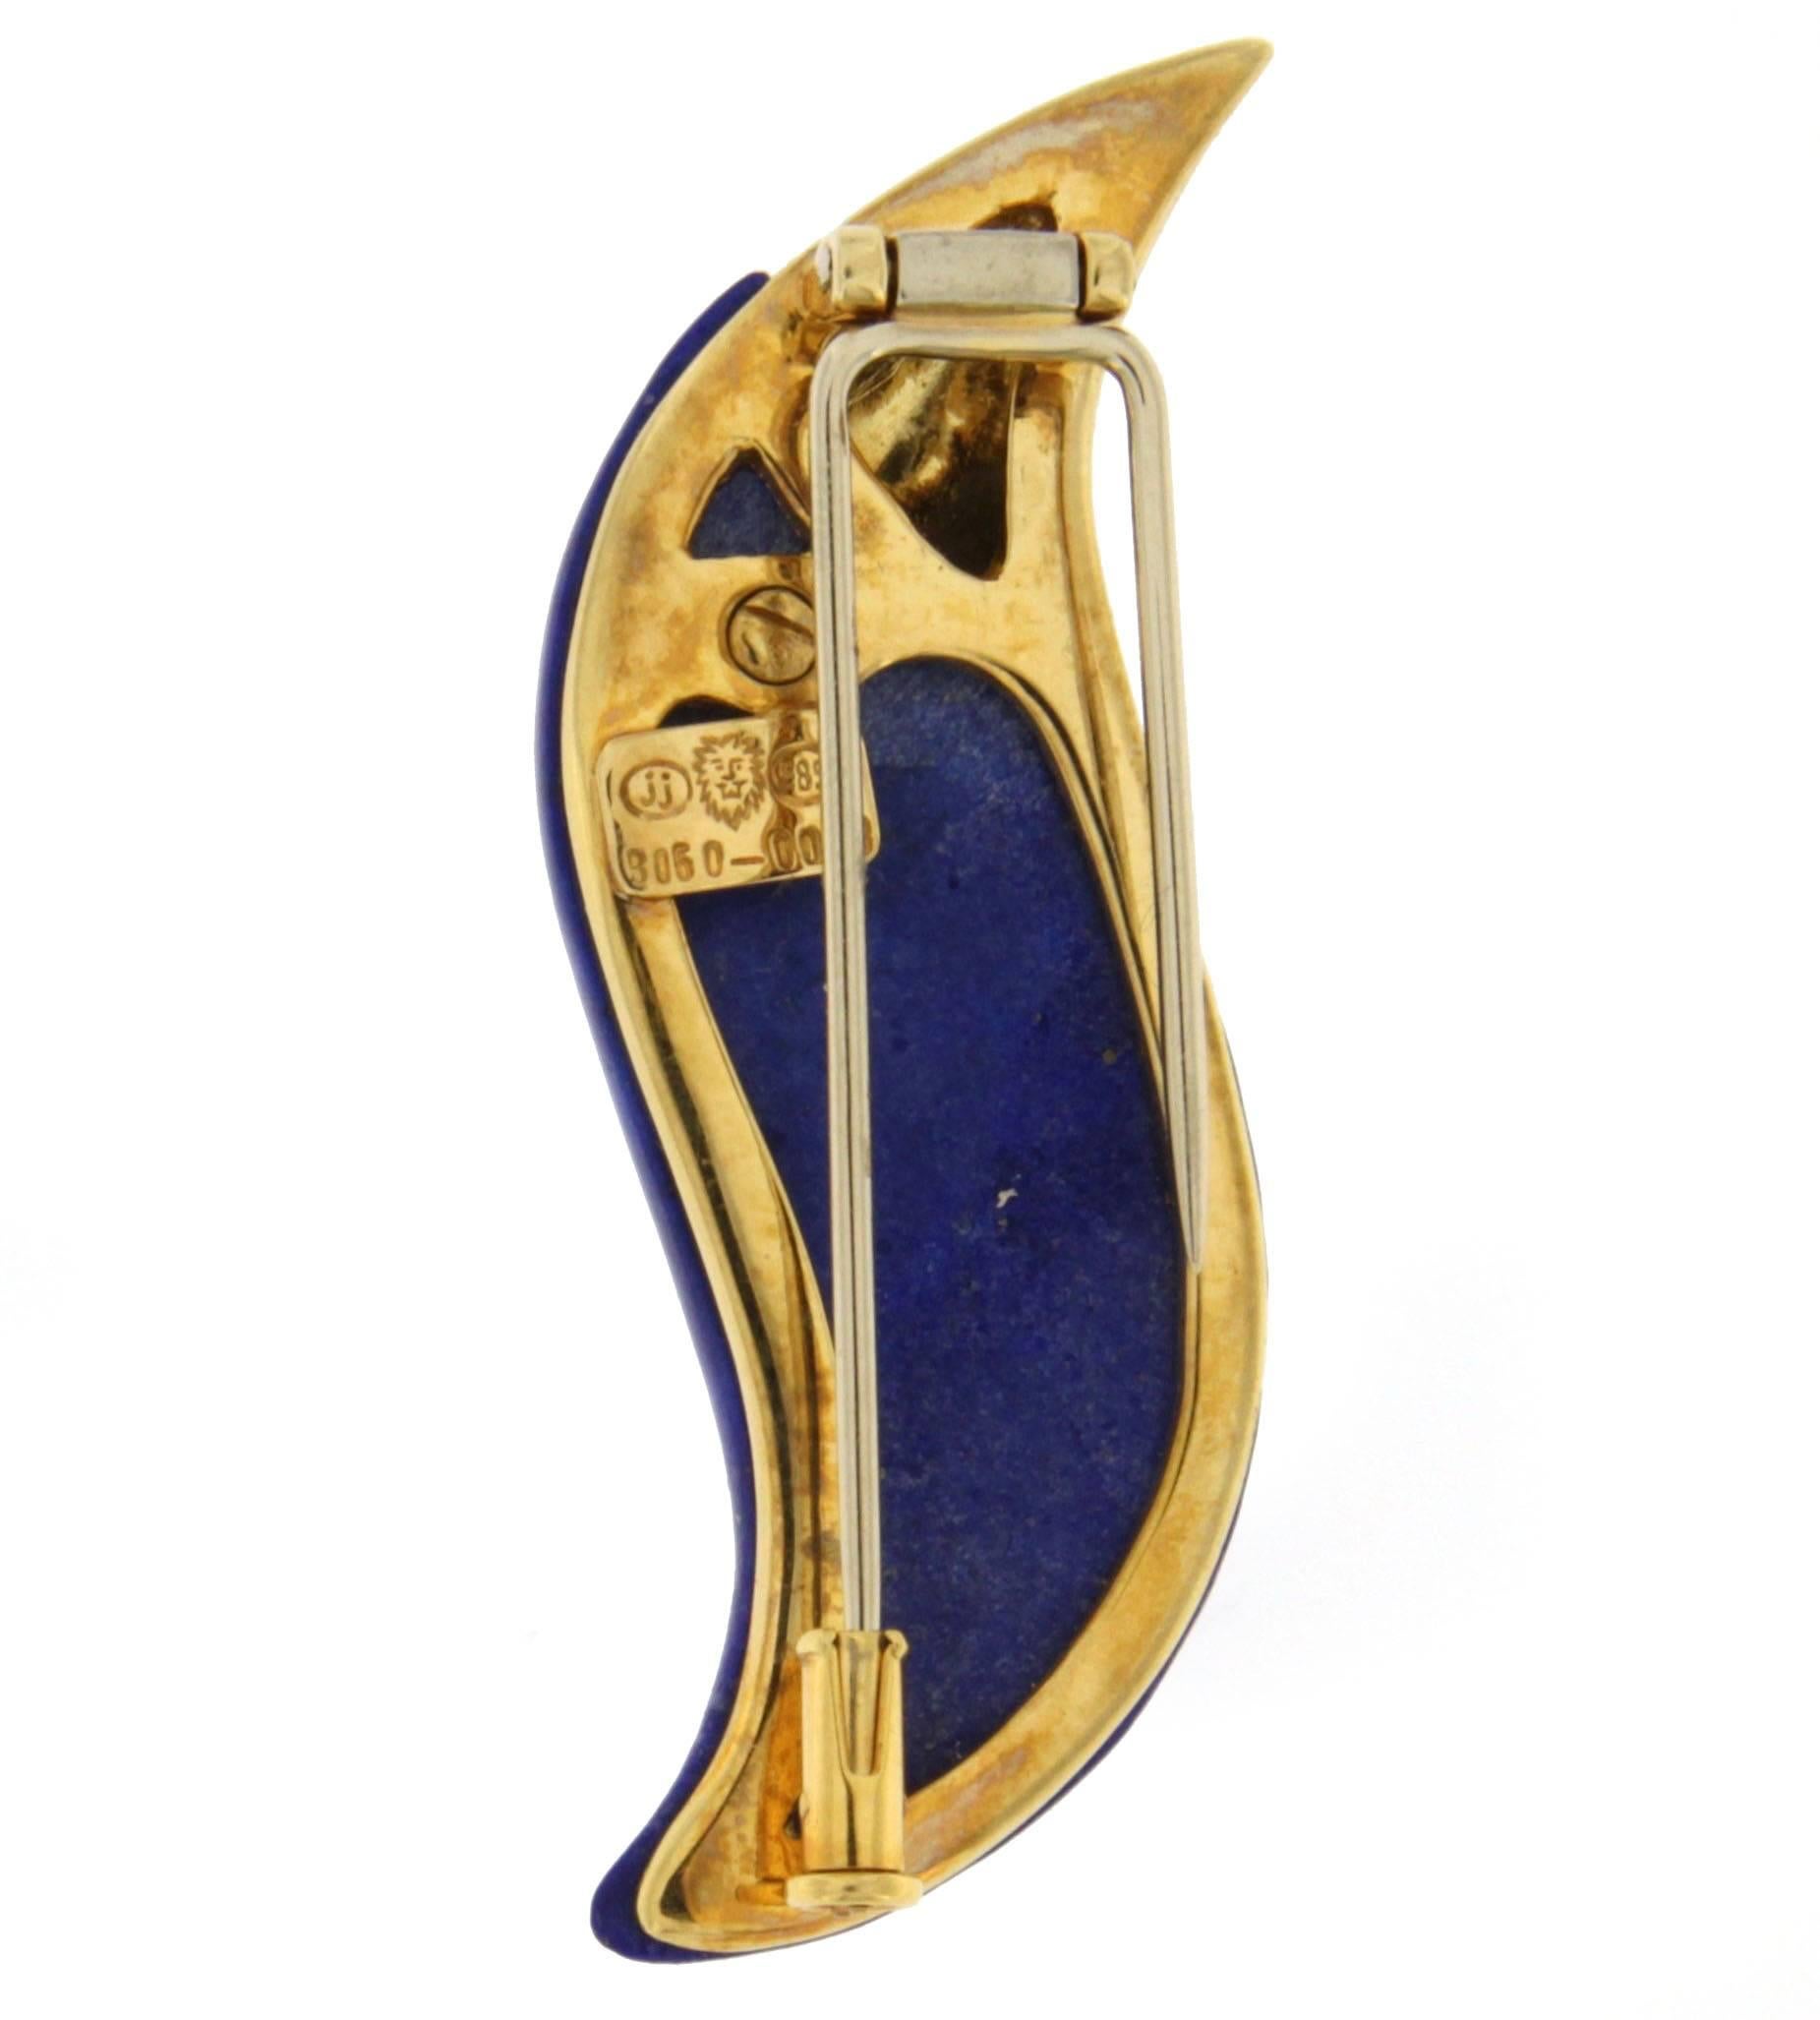 Jona design collection, hand crafted in Italy, 18 karat yellow gold and lapis lazuli toucan brooch, set with a white diamond eye.    
All Jona jewelry is new and has never been previously owned or worn. Each item will arrive at your door beautifully